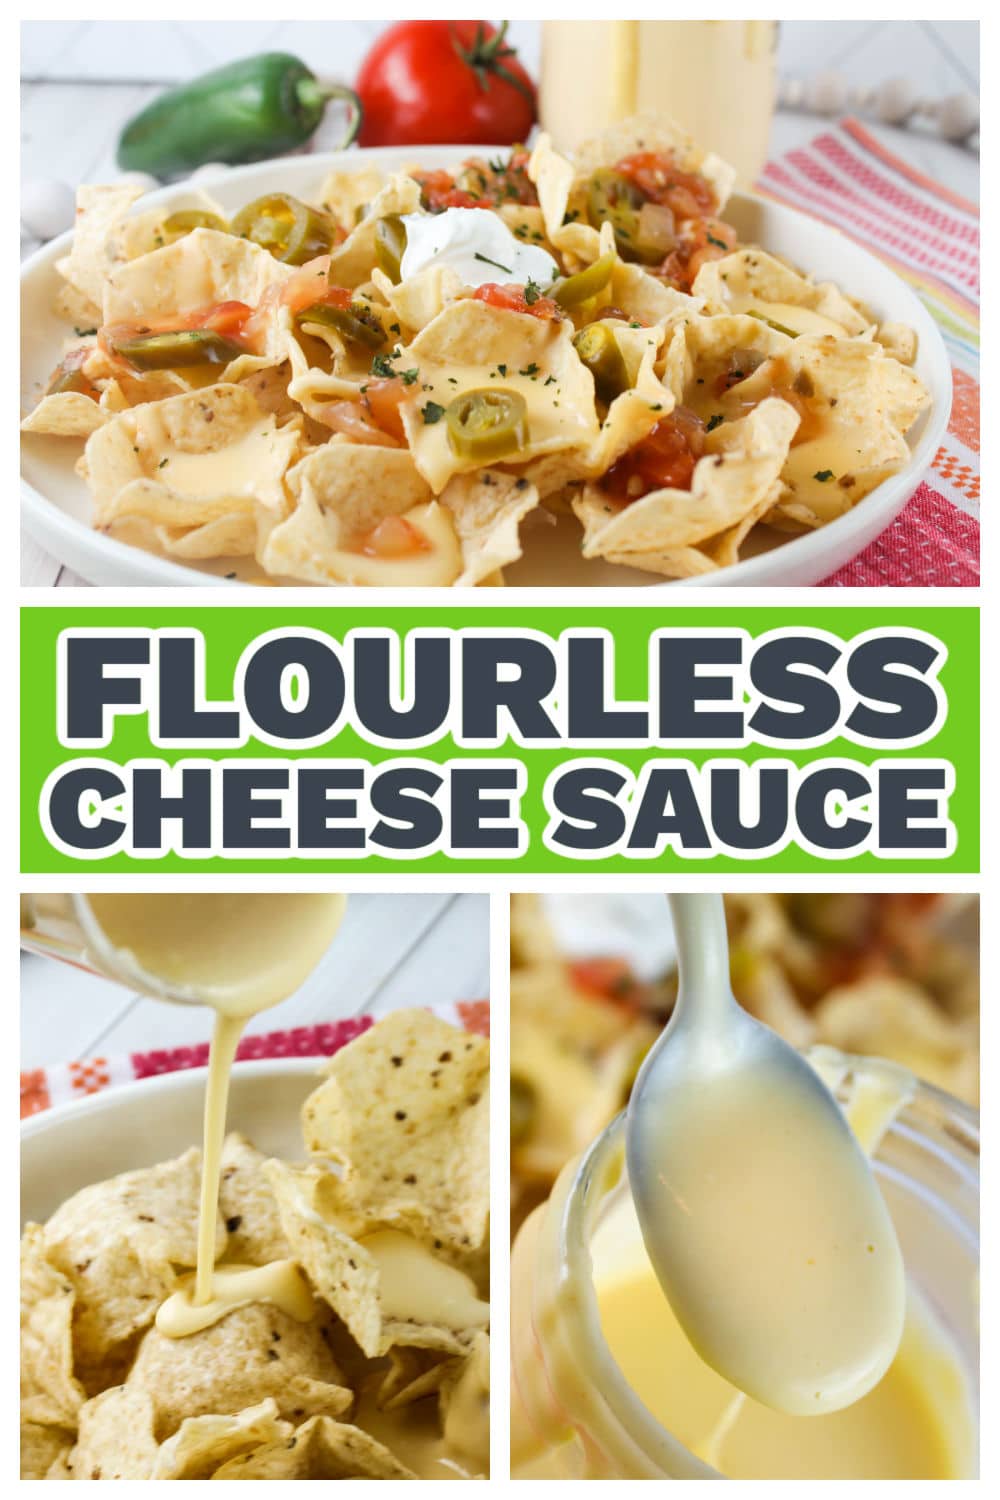 Flourless cheese sauce is melty and delicious - and best of all - cheesy!!! I love cheese sauce but so many of them use flour and I don't like that taste so I wanted to make a flourless cheese sauce that I can use on nachos, pasta and even pizza!  via @foodhussy